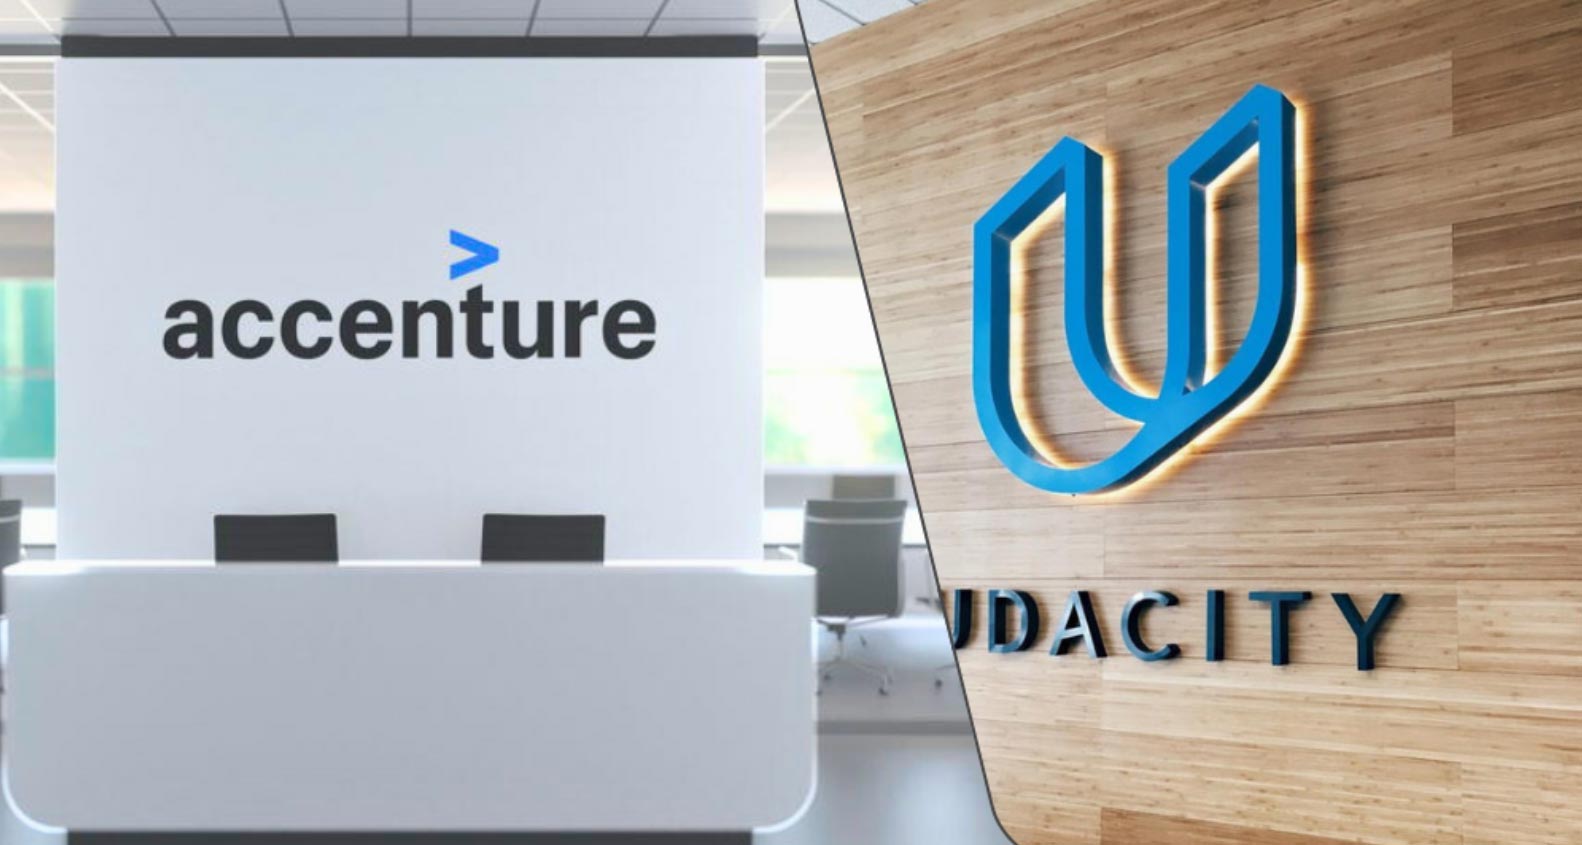 Accenture to acquire EdTech co Udacity, invest $1 bn on new upskilling platform